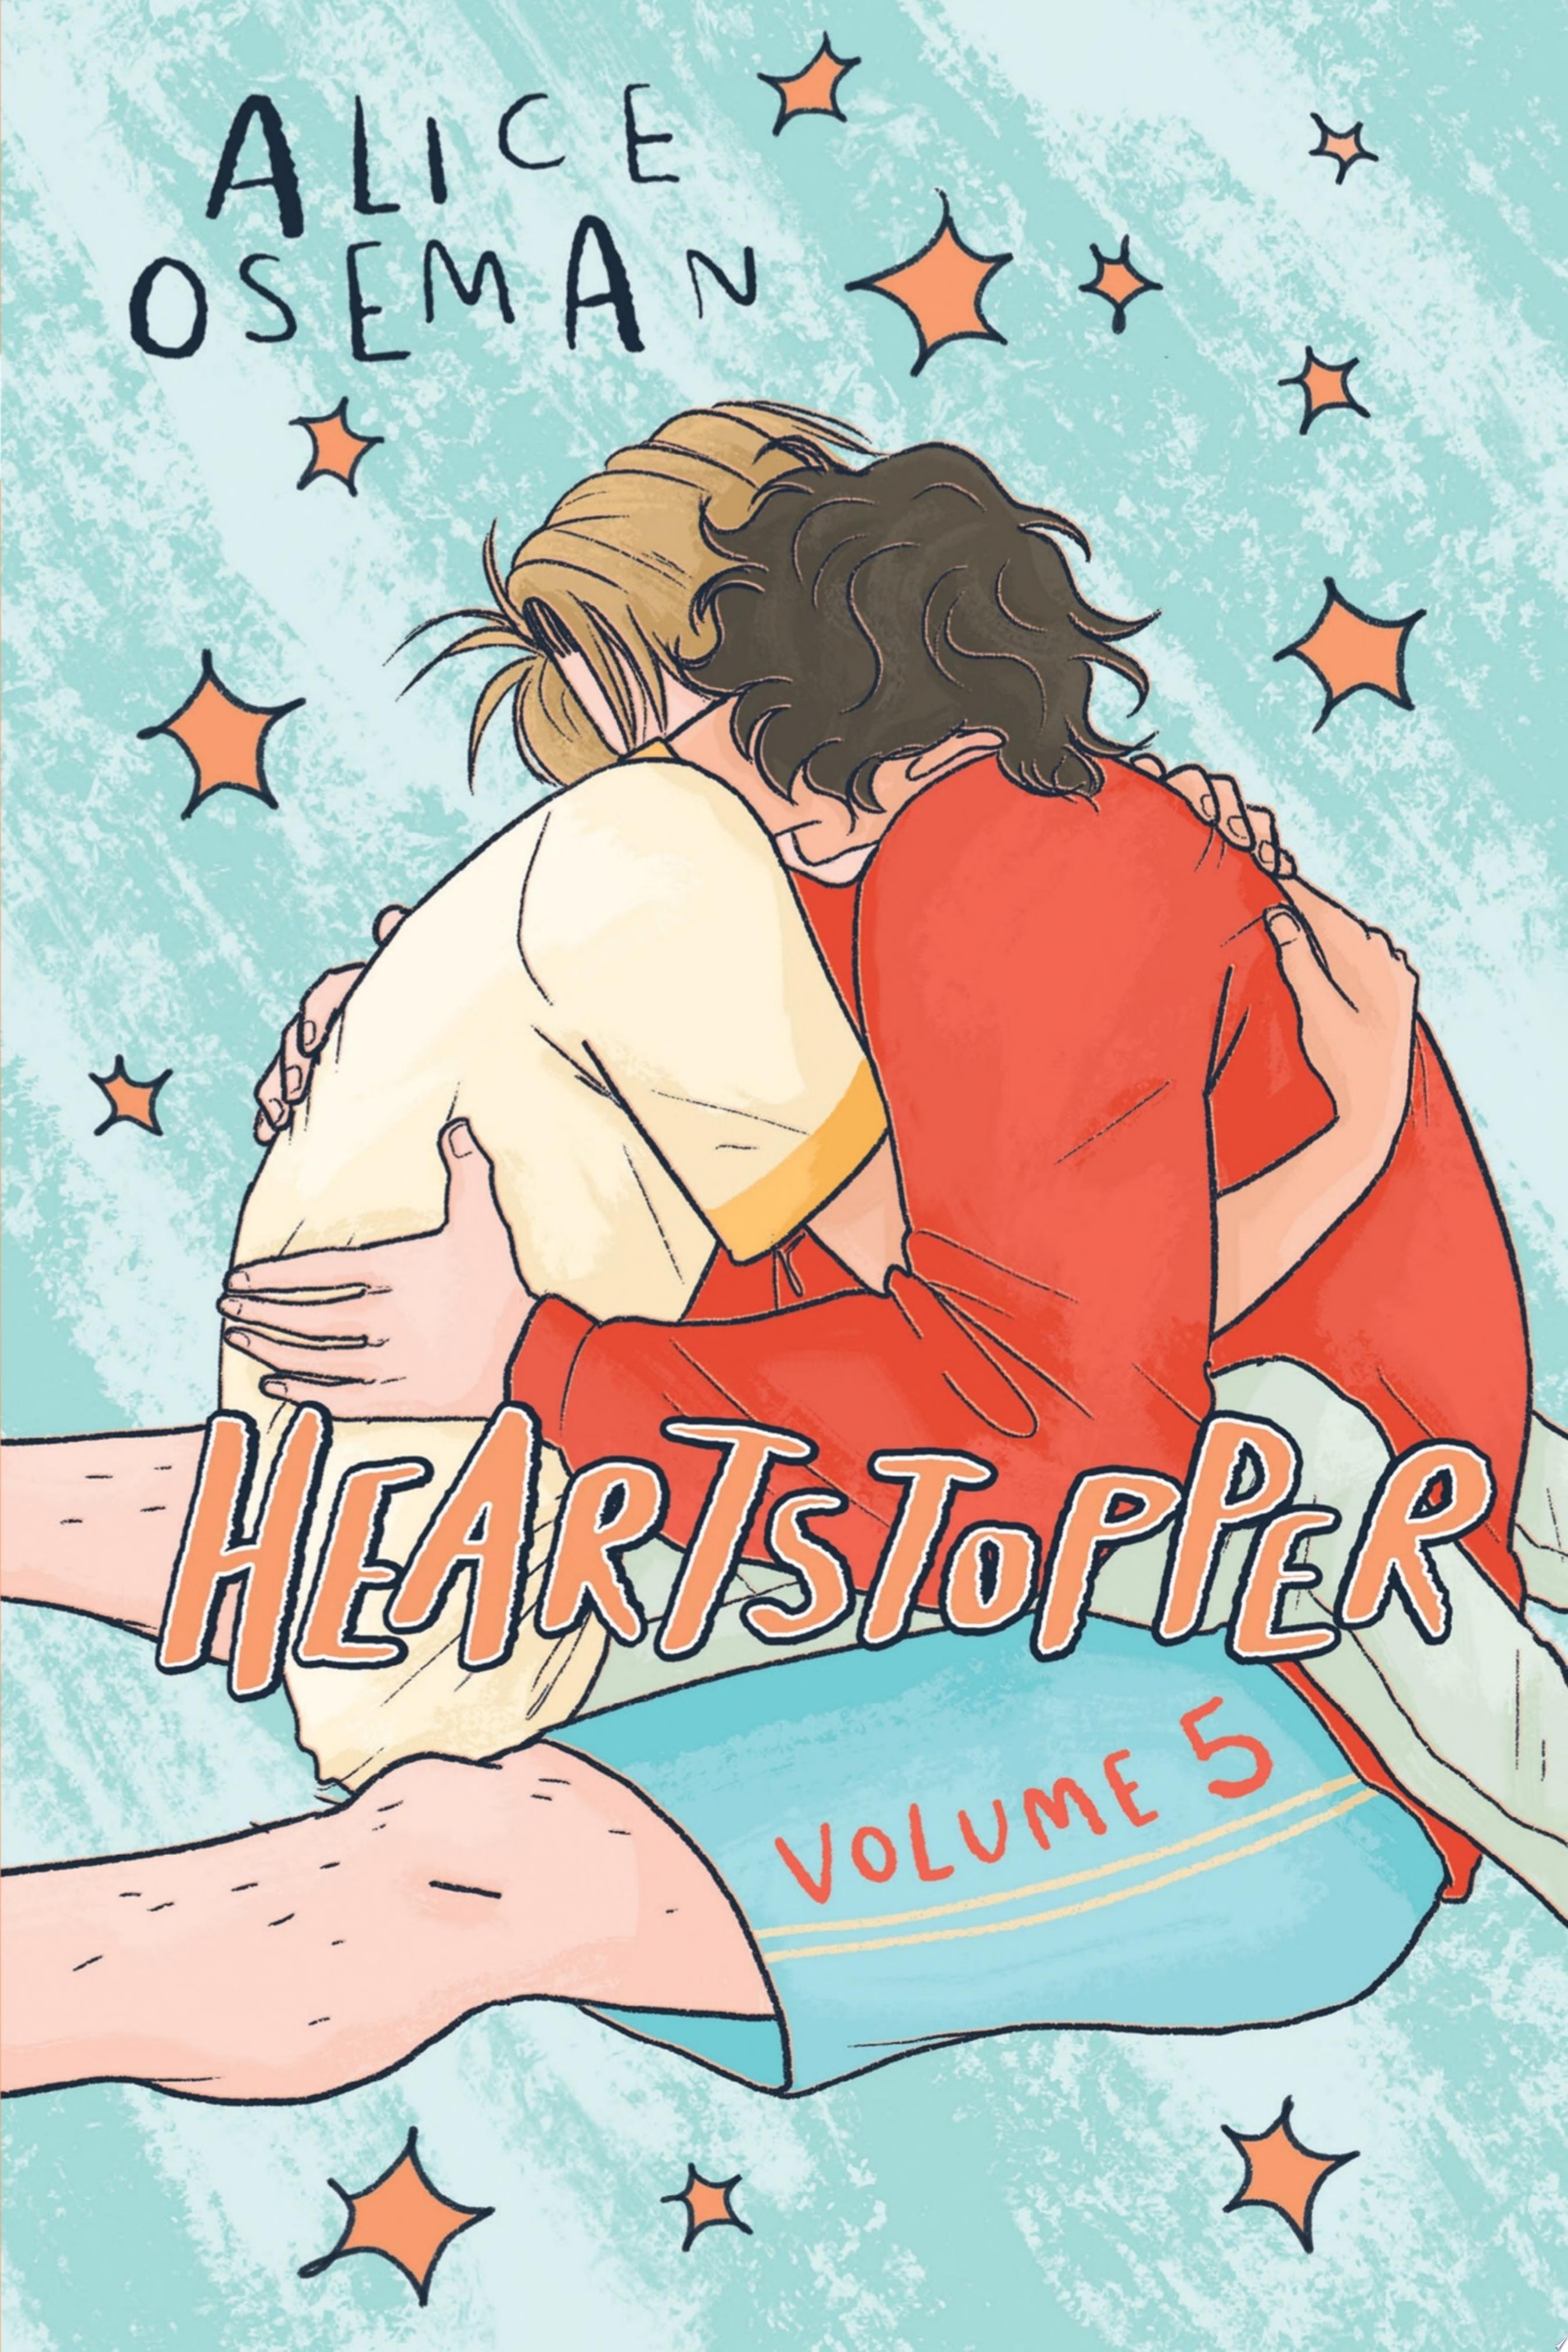 Cover for "Heartstopper #5: A Graphic Novel"